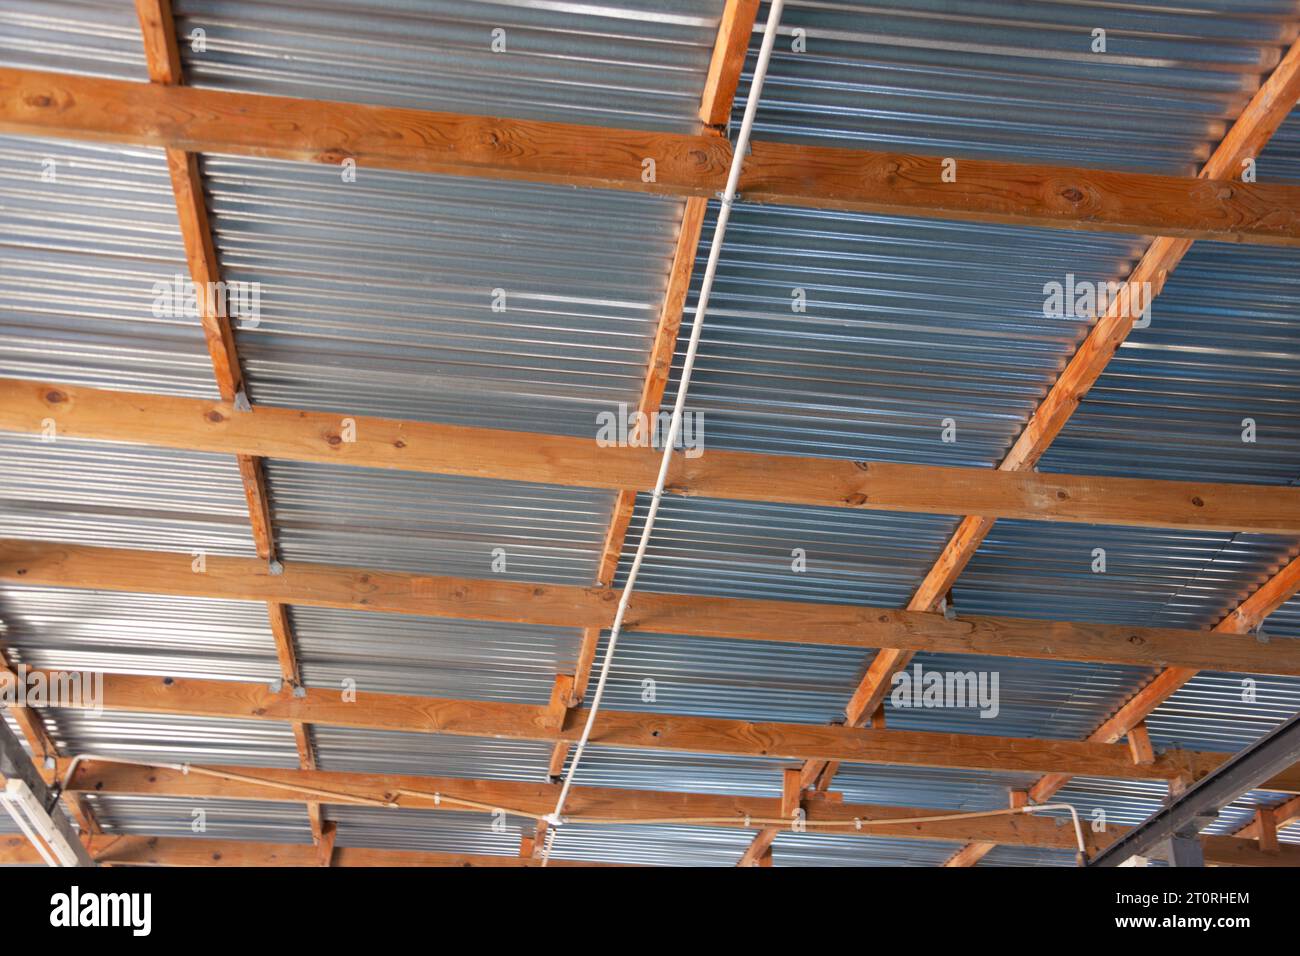 corrugated iron roof and wooden trusses for support indoors Stock Photo